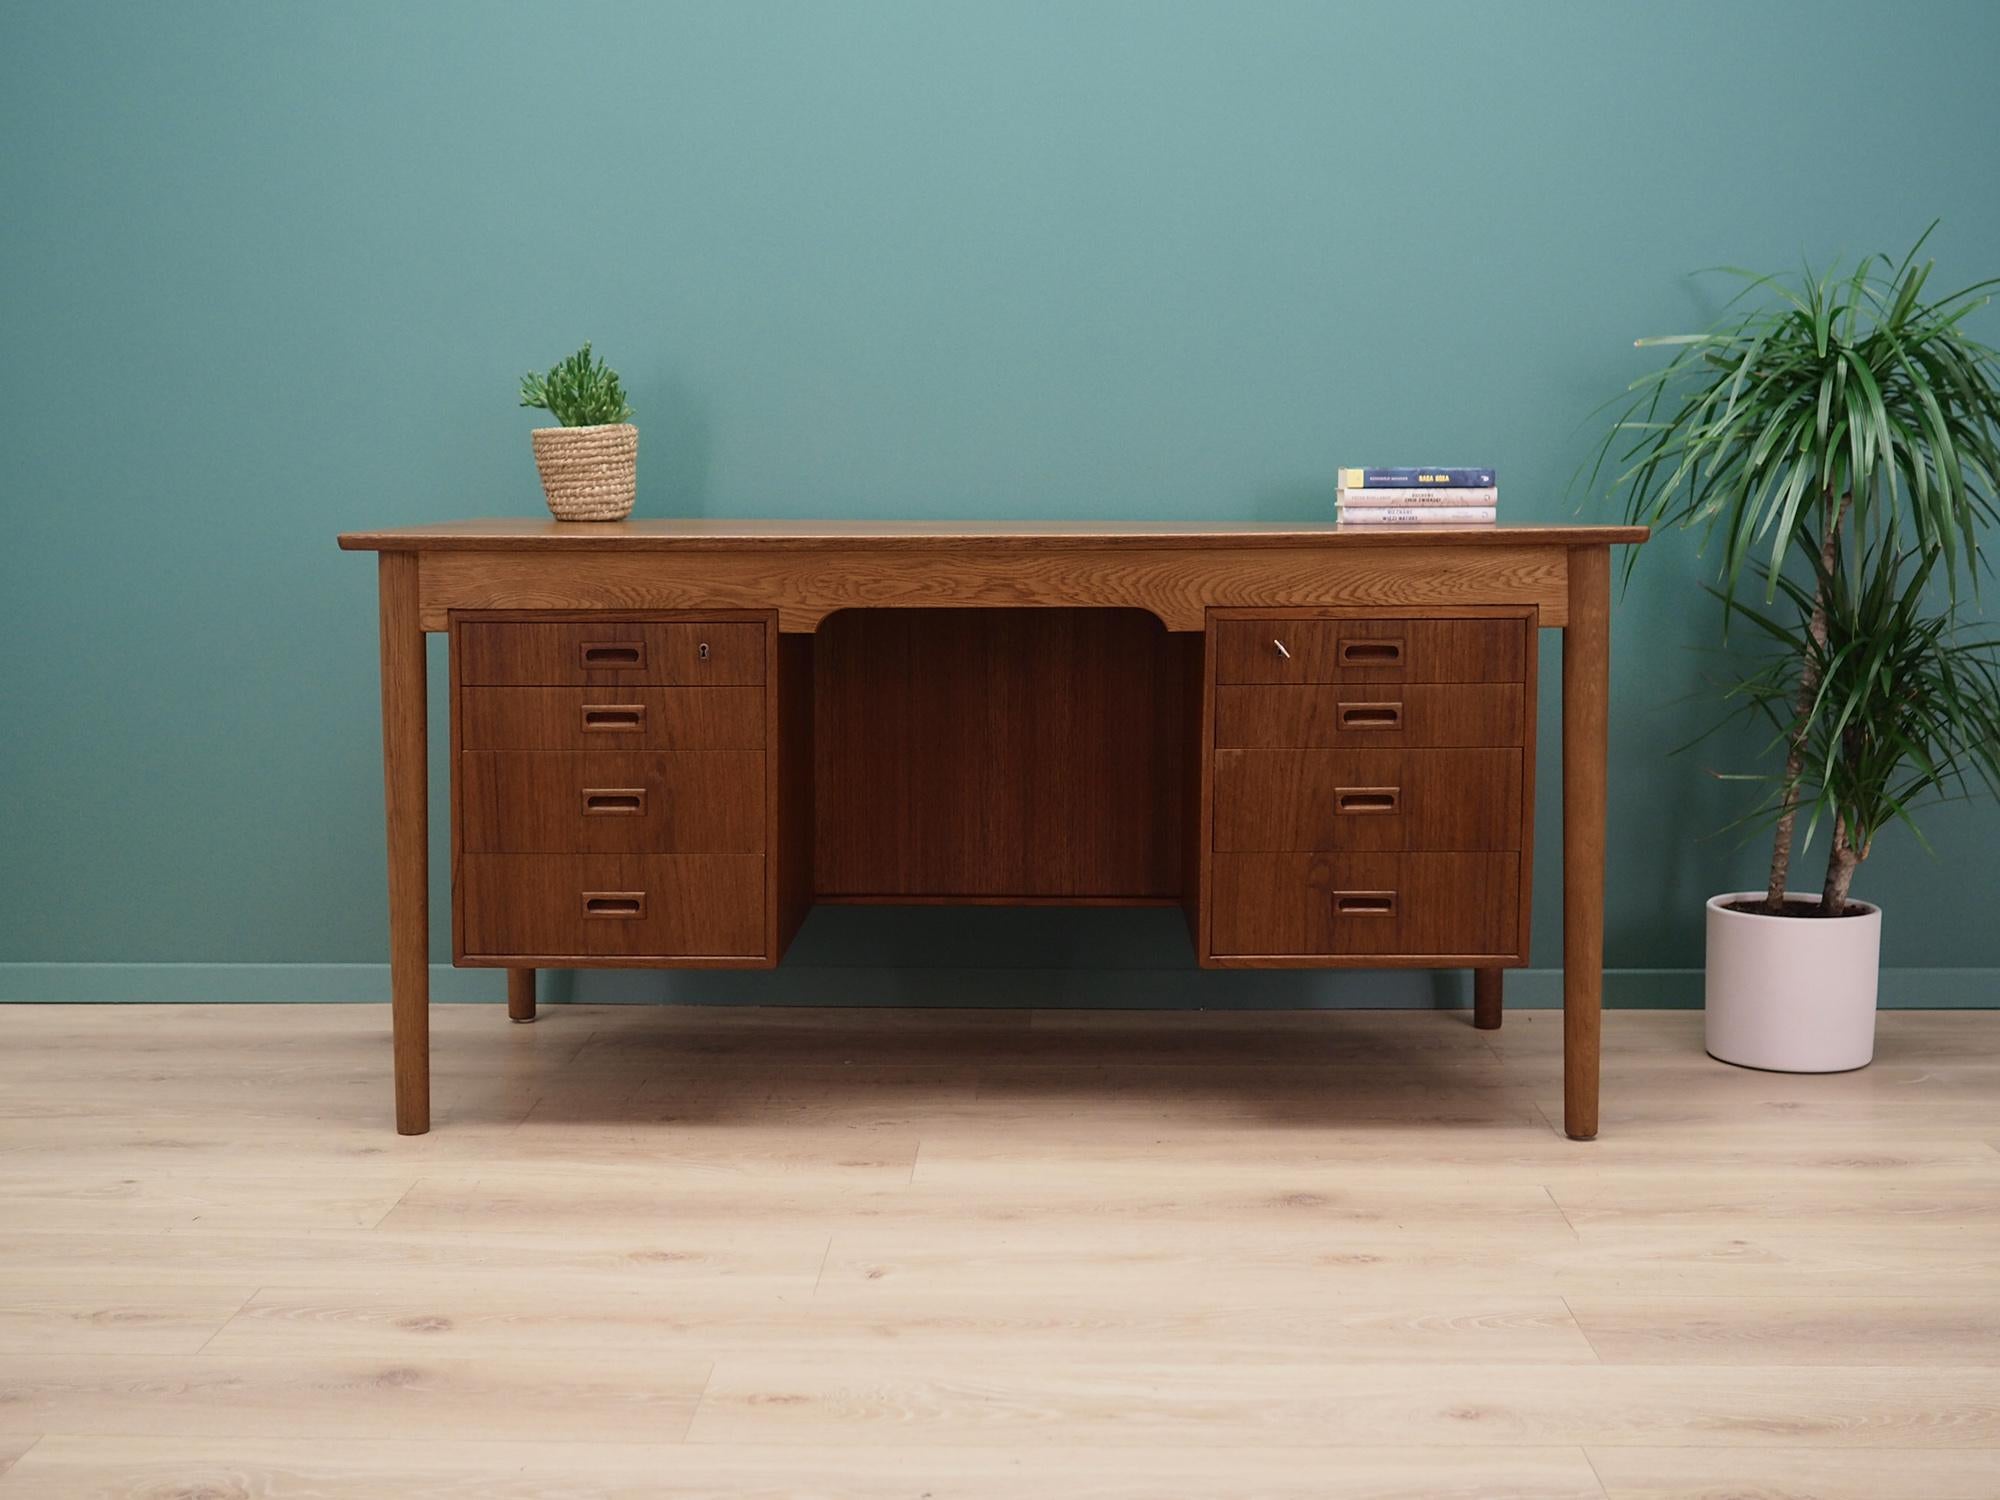 Desk made in the 1970s, Danish production.

The structure and top are covered with teak veneer. The legs are made of solid oak wood, perfectly integrated into the structure of the desk. The surface after refreshing. The front of the desk has eight